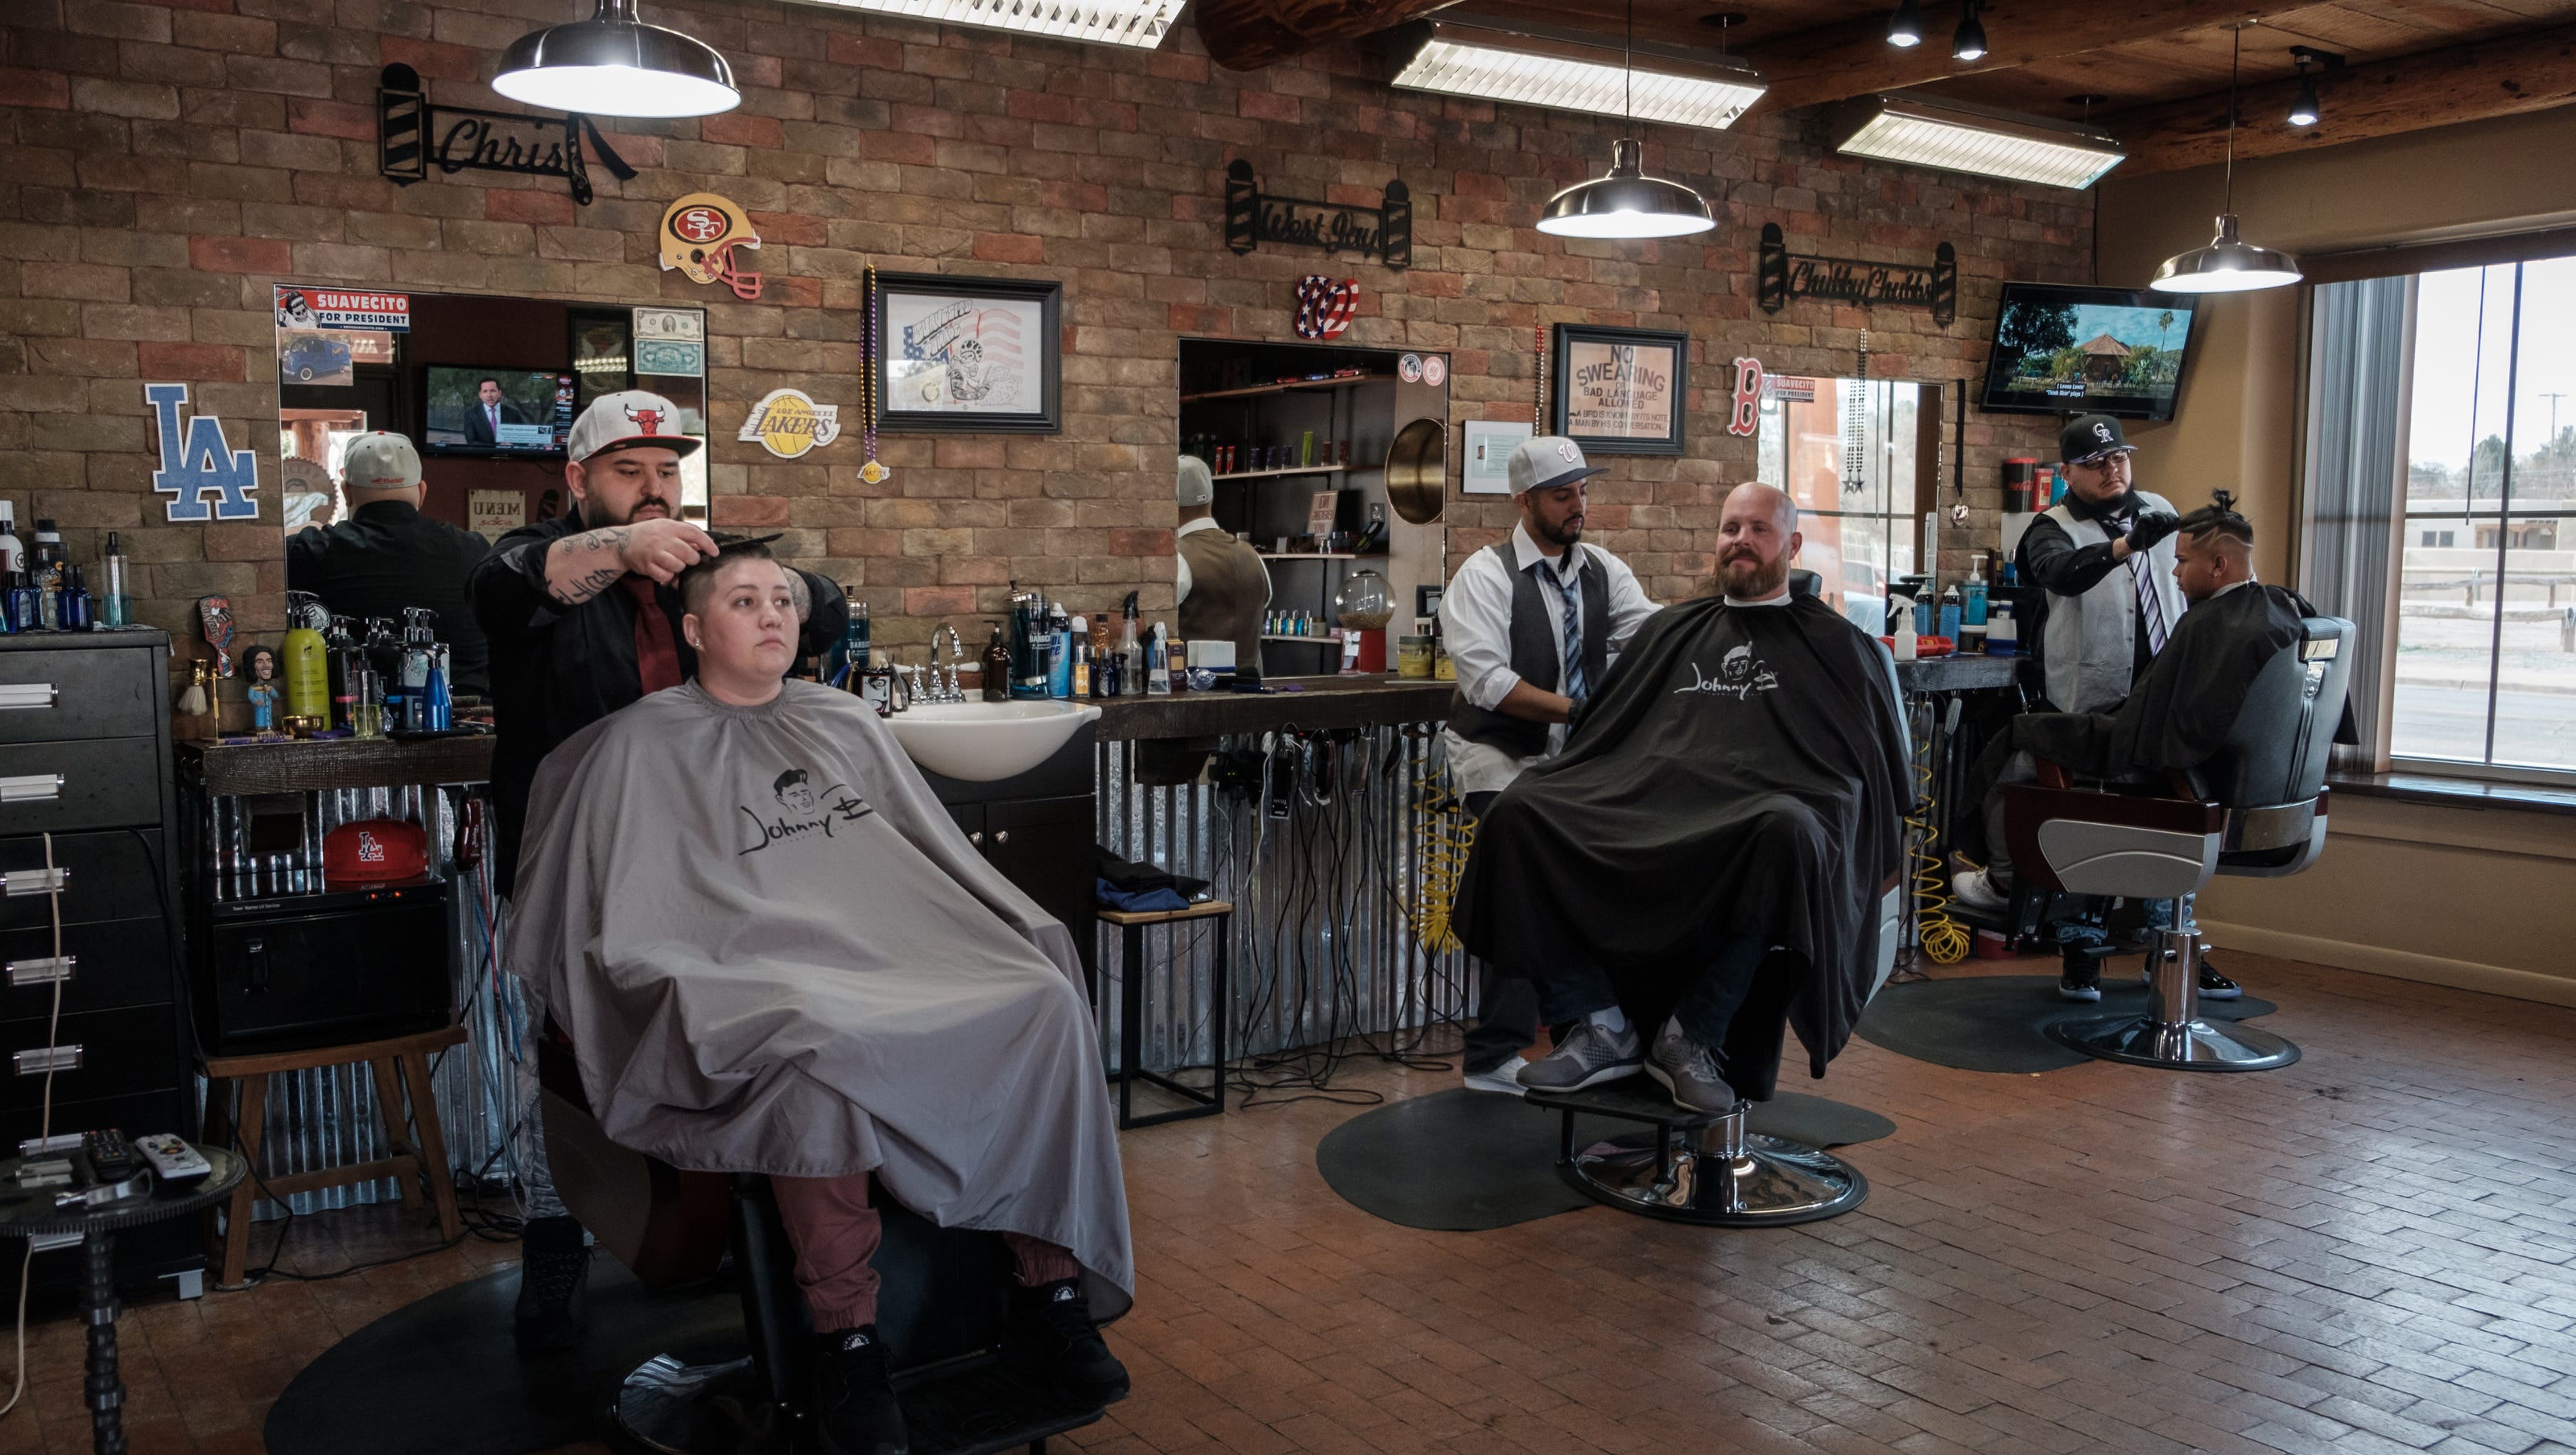 State issues guidance to barber shops, nail salons